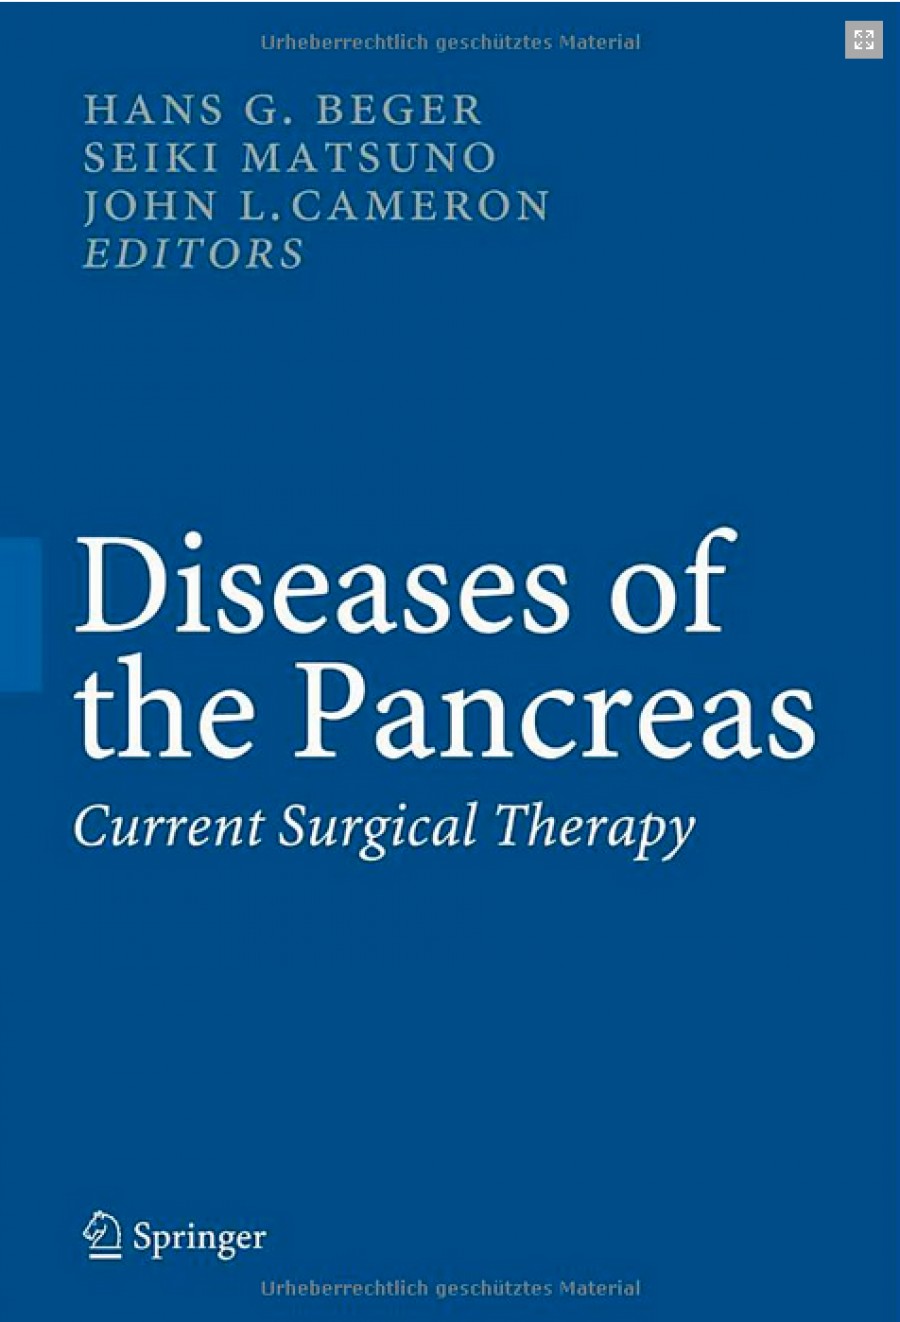 Diseases of the Pancreas - Current Surgical Therapy